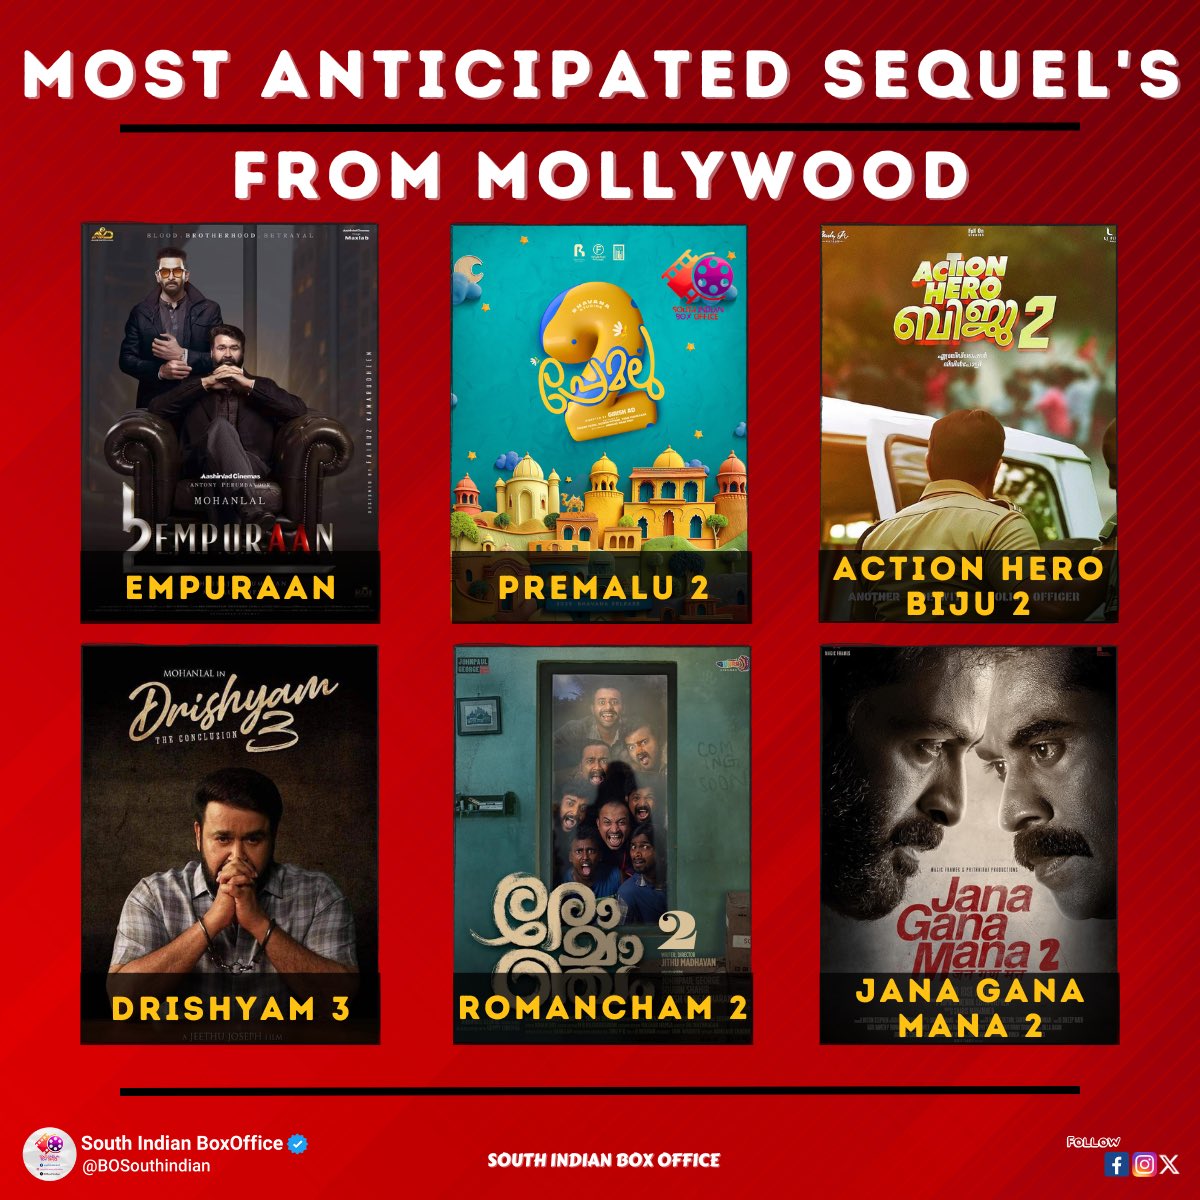 Most Anticipated Sequels From Mollywood !! 

Which is Your Most Awaiting Sequel ?

#Empuraan | #Premalu2 | #ActionHeroBiju2
#Drishyam3 | #Romancham2 | #JGM2